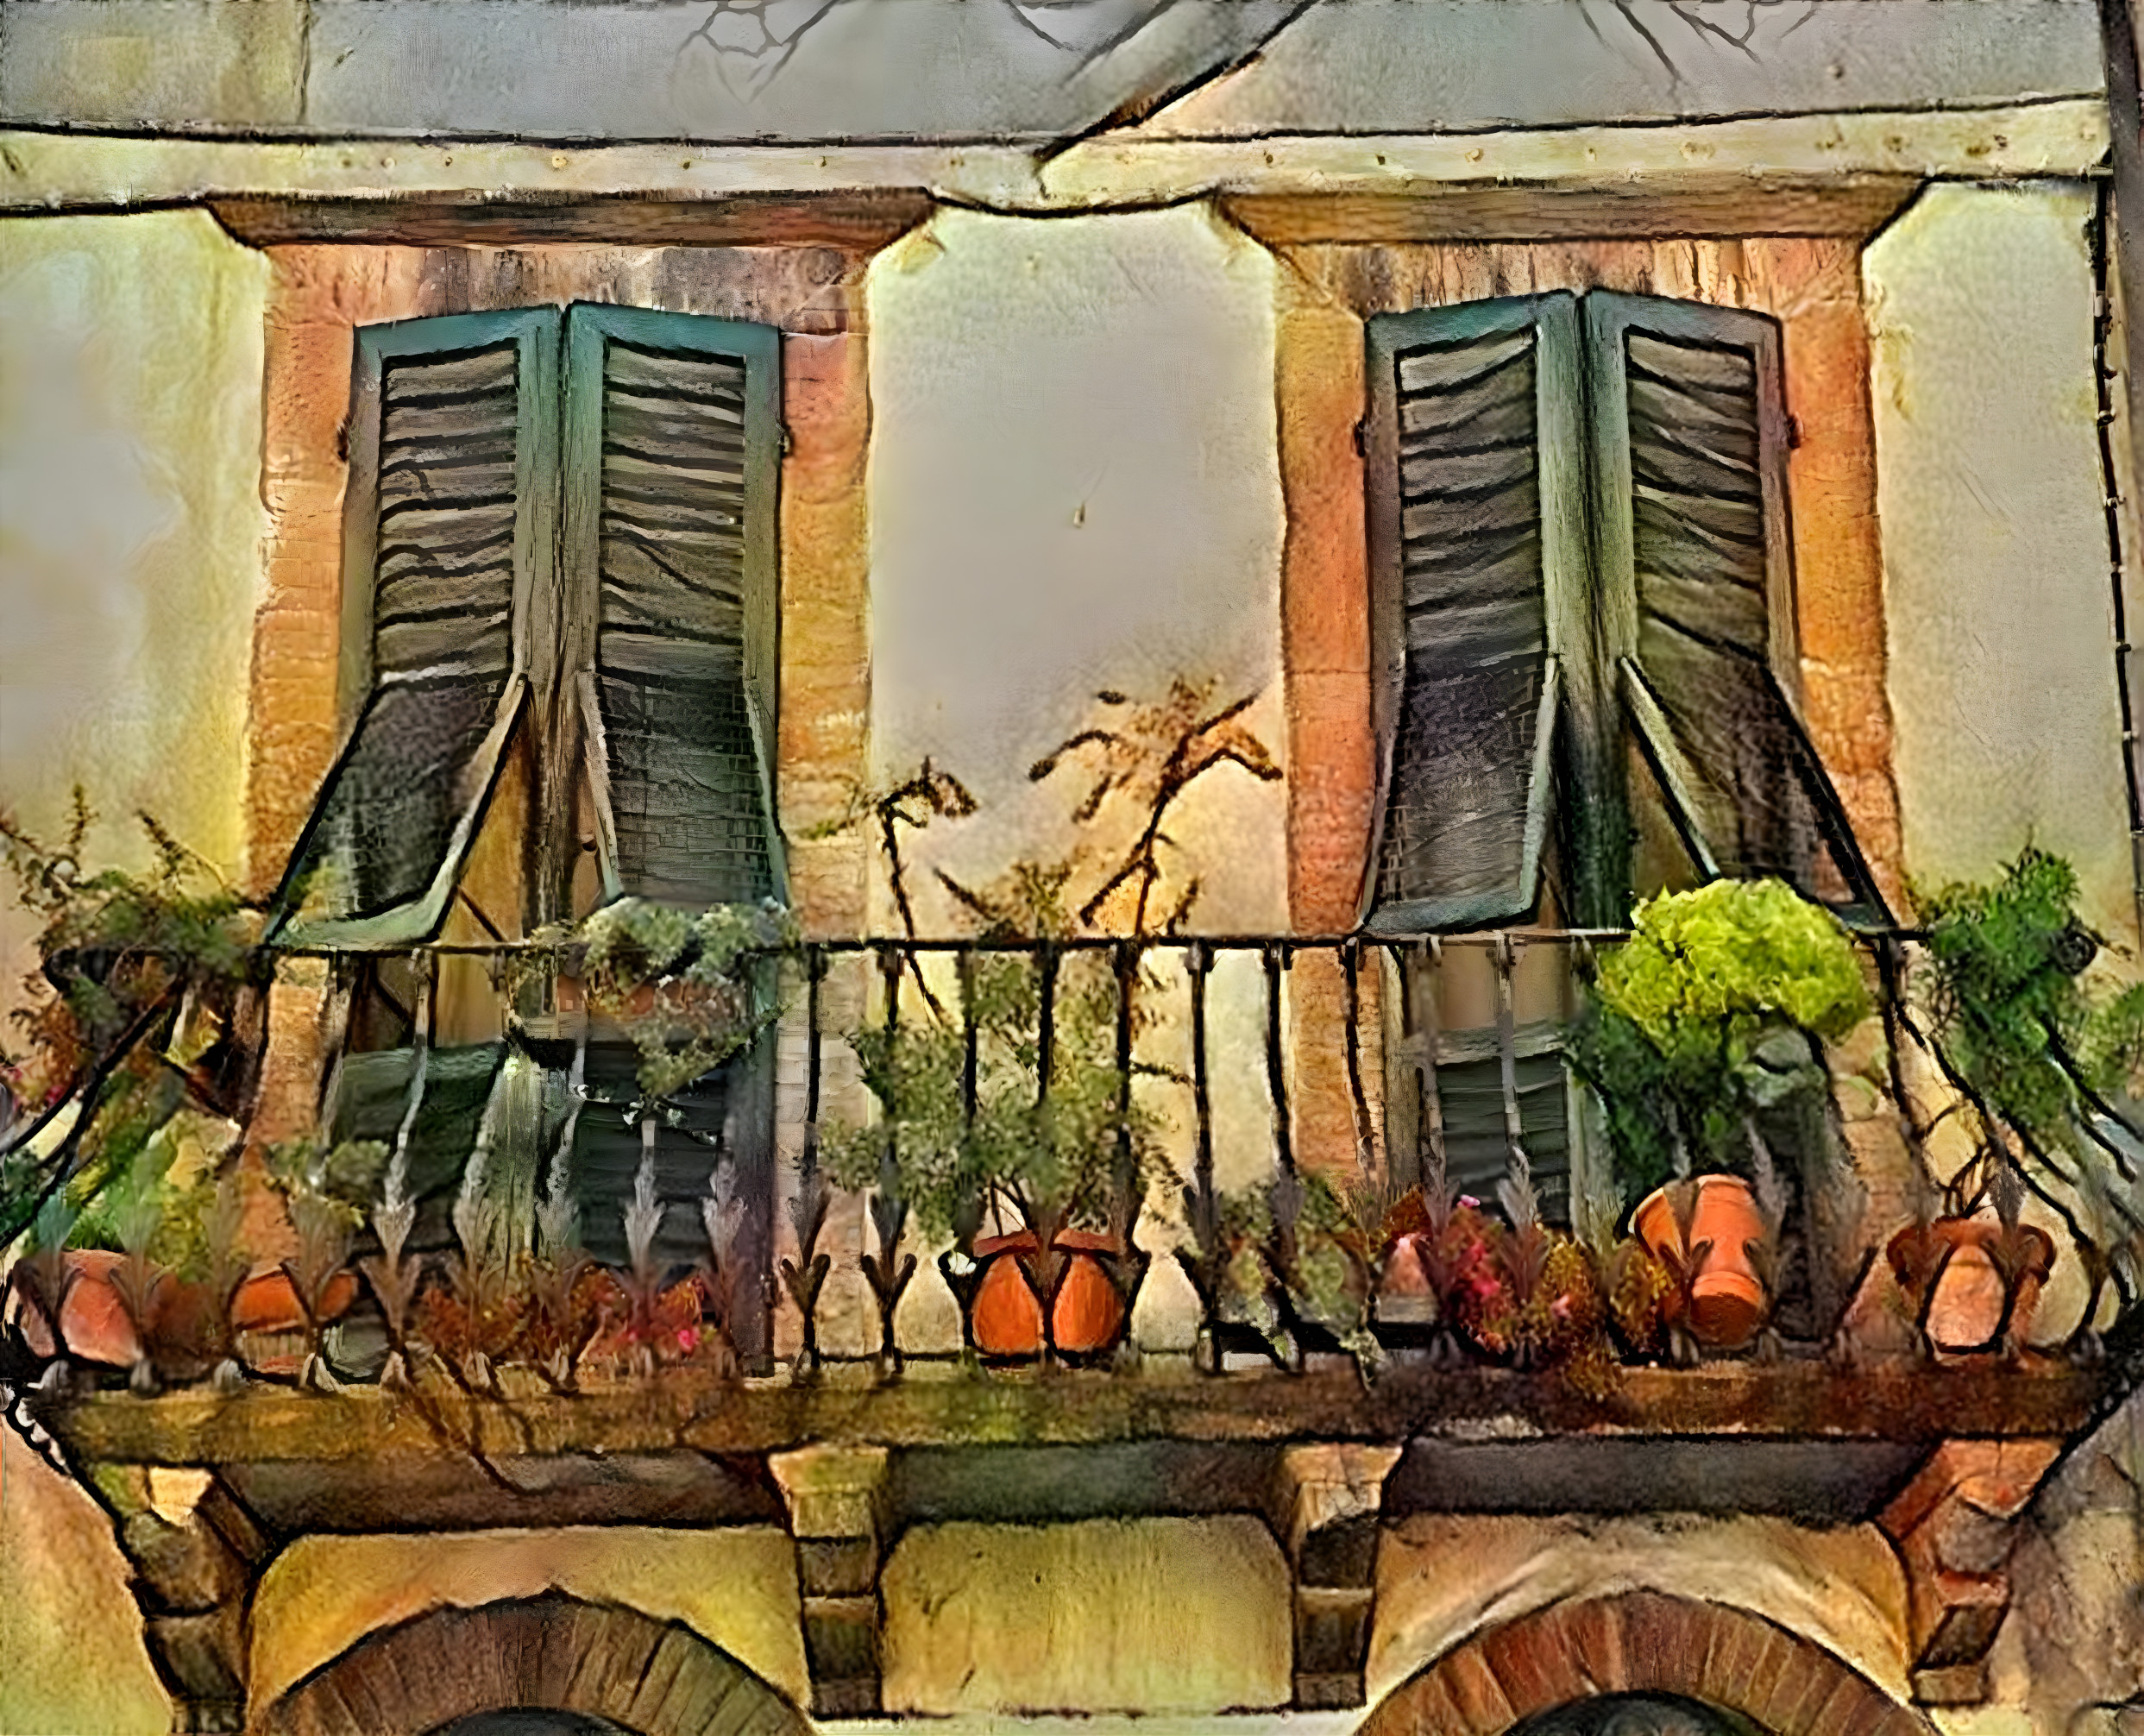 Another Balcony 